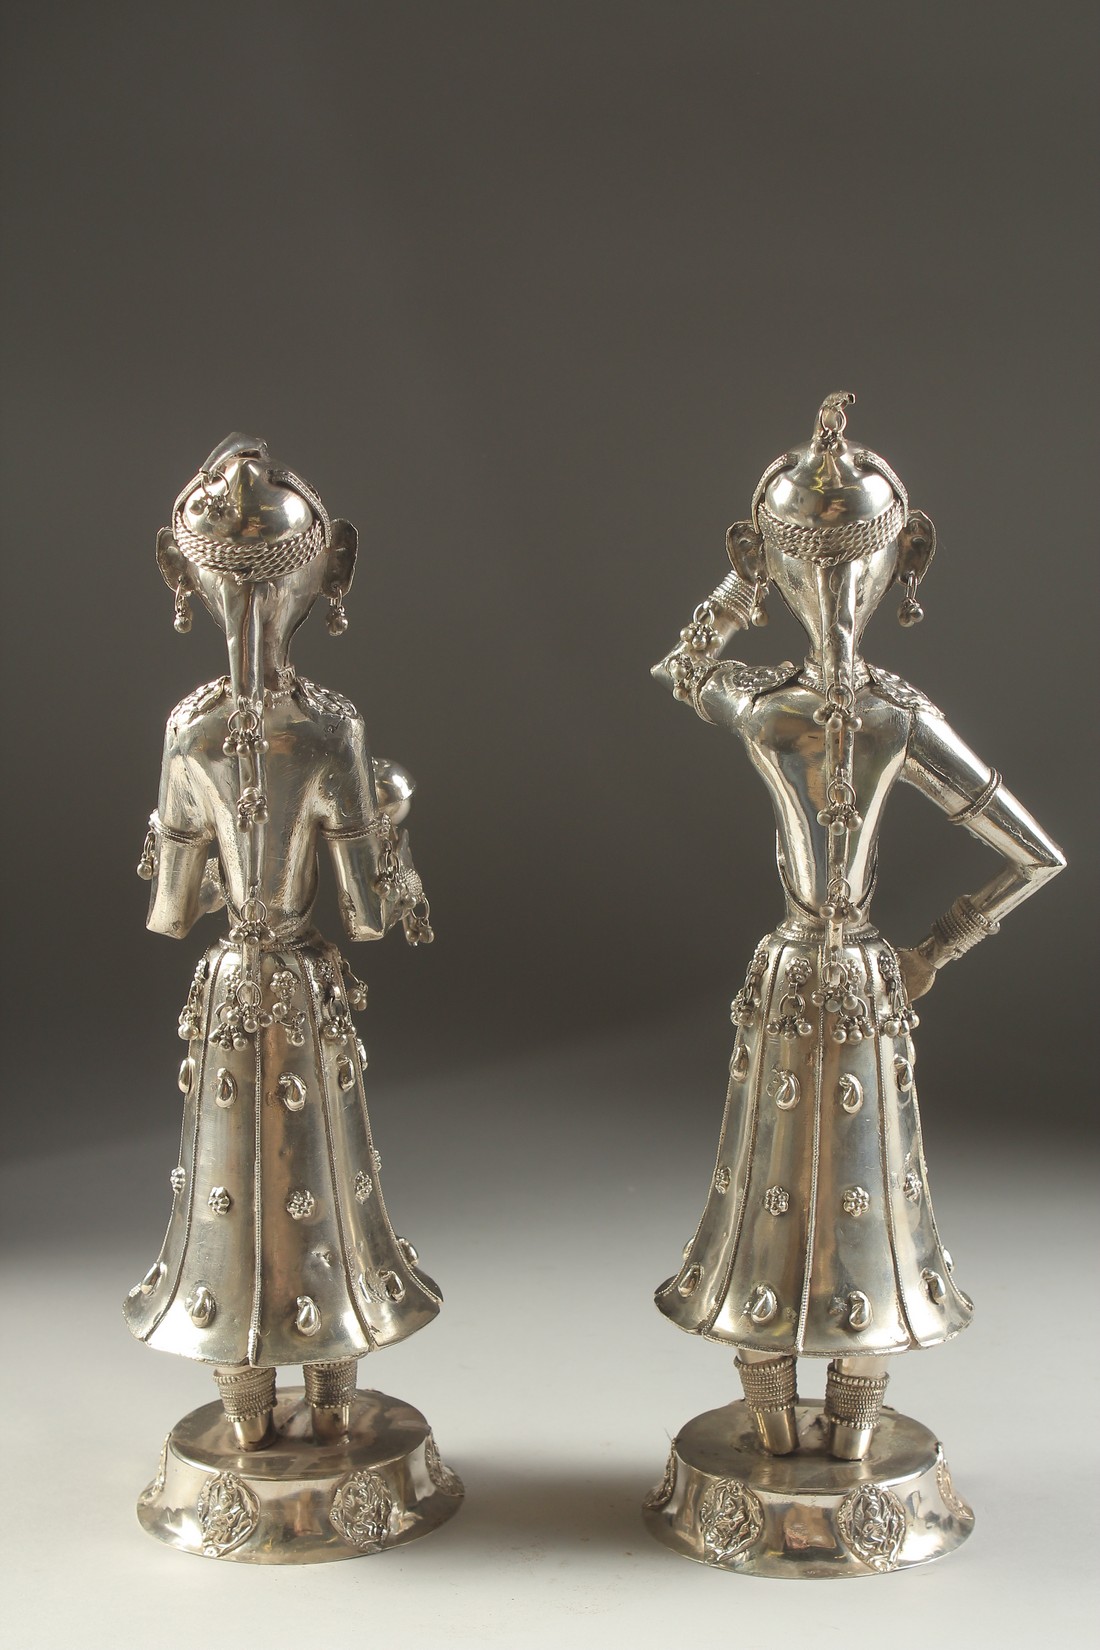 A FINE PAIR OF 19TH CENTURY INDIAN SILVER FIGURES OF MUSICIANS, 30cm high. - Image 9 of 11